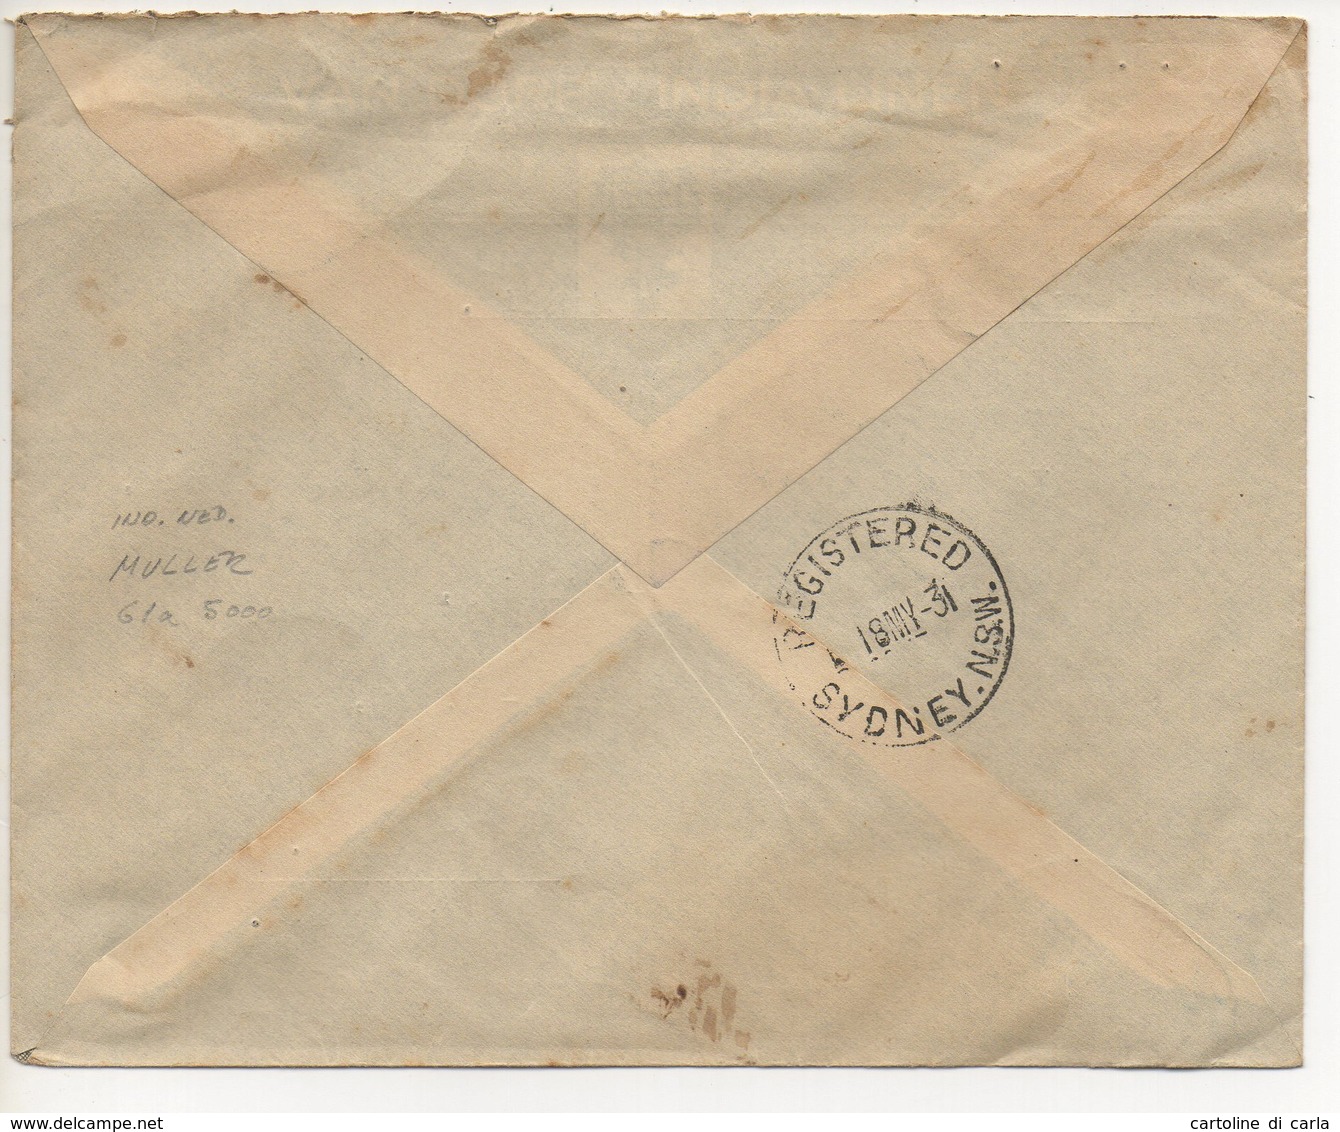 AIR MAIL LETTER 11 05 1931 #54 - Indonesia